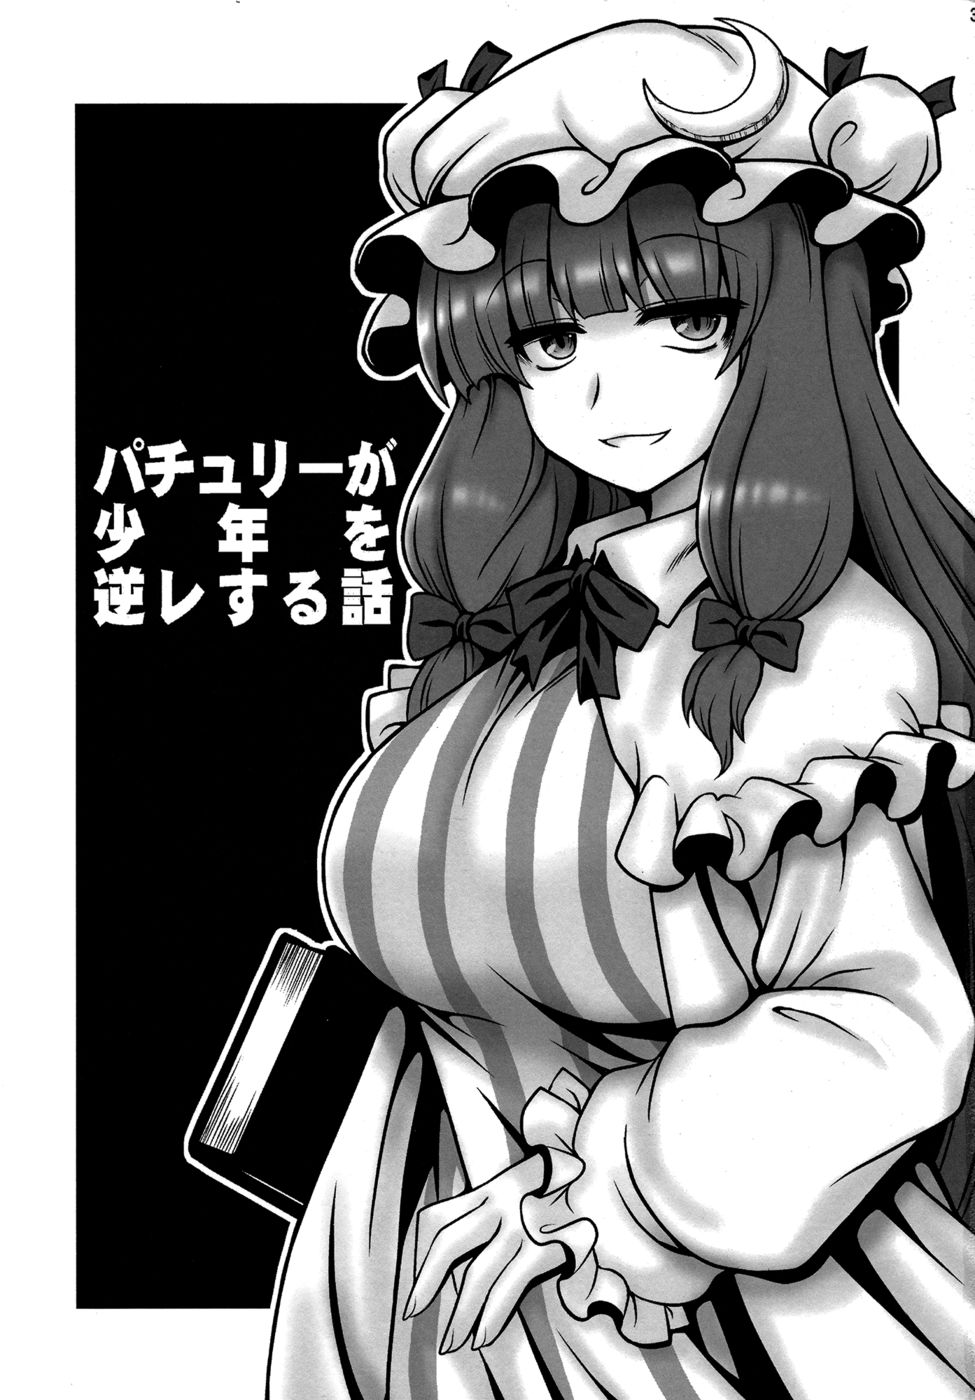 Hentai Manga Comic-The Tale of Patchouli's Reverse Rape of a Young Boy-Read-2